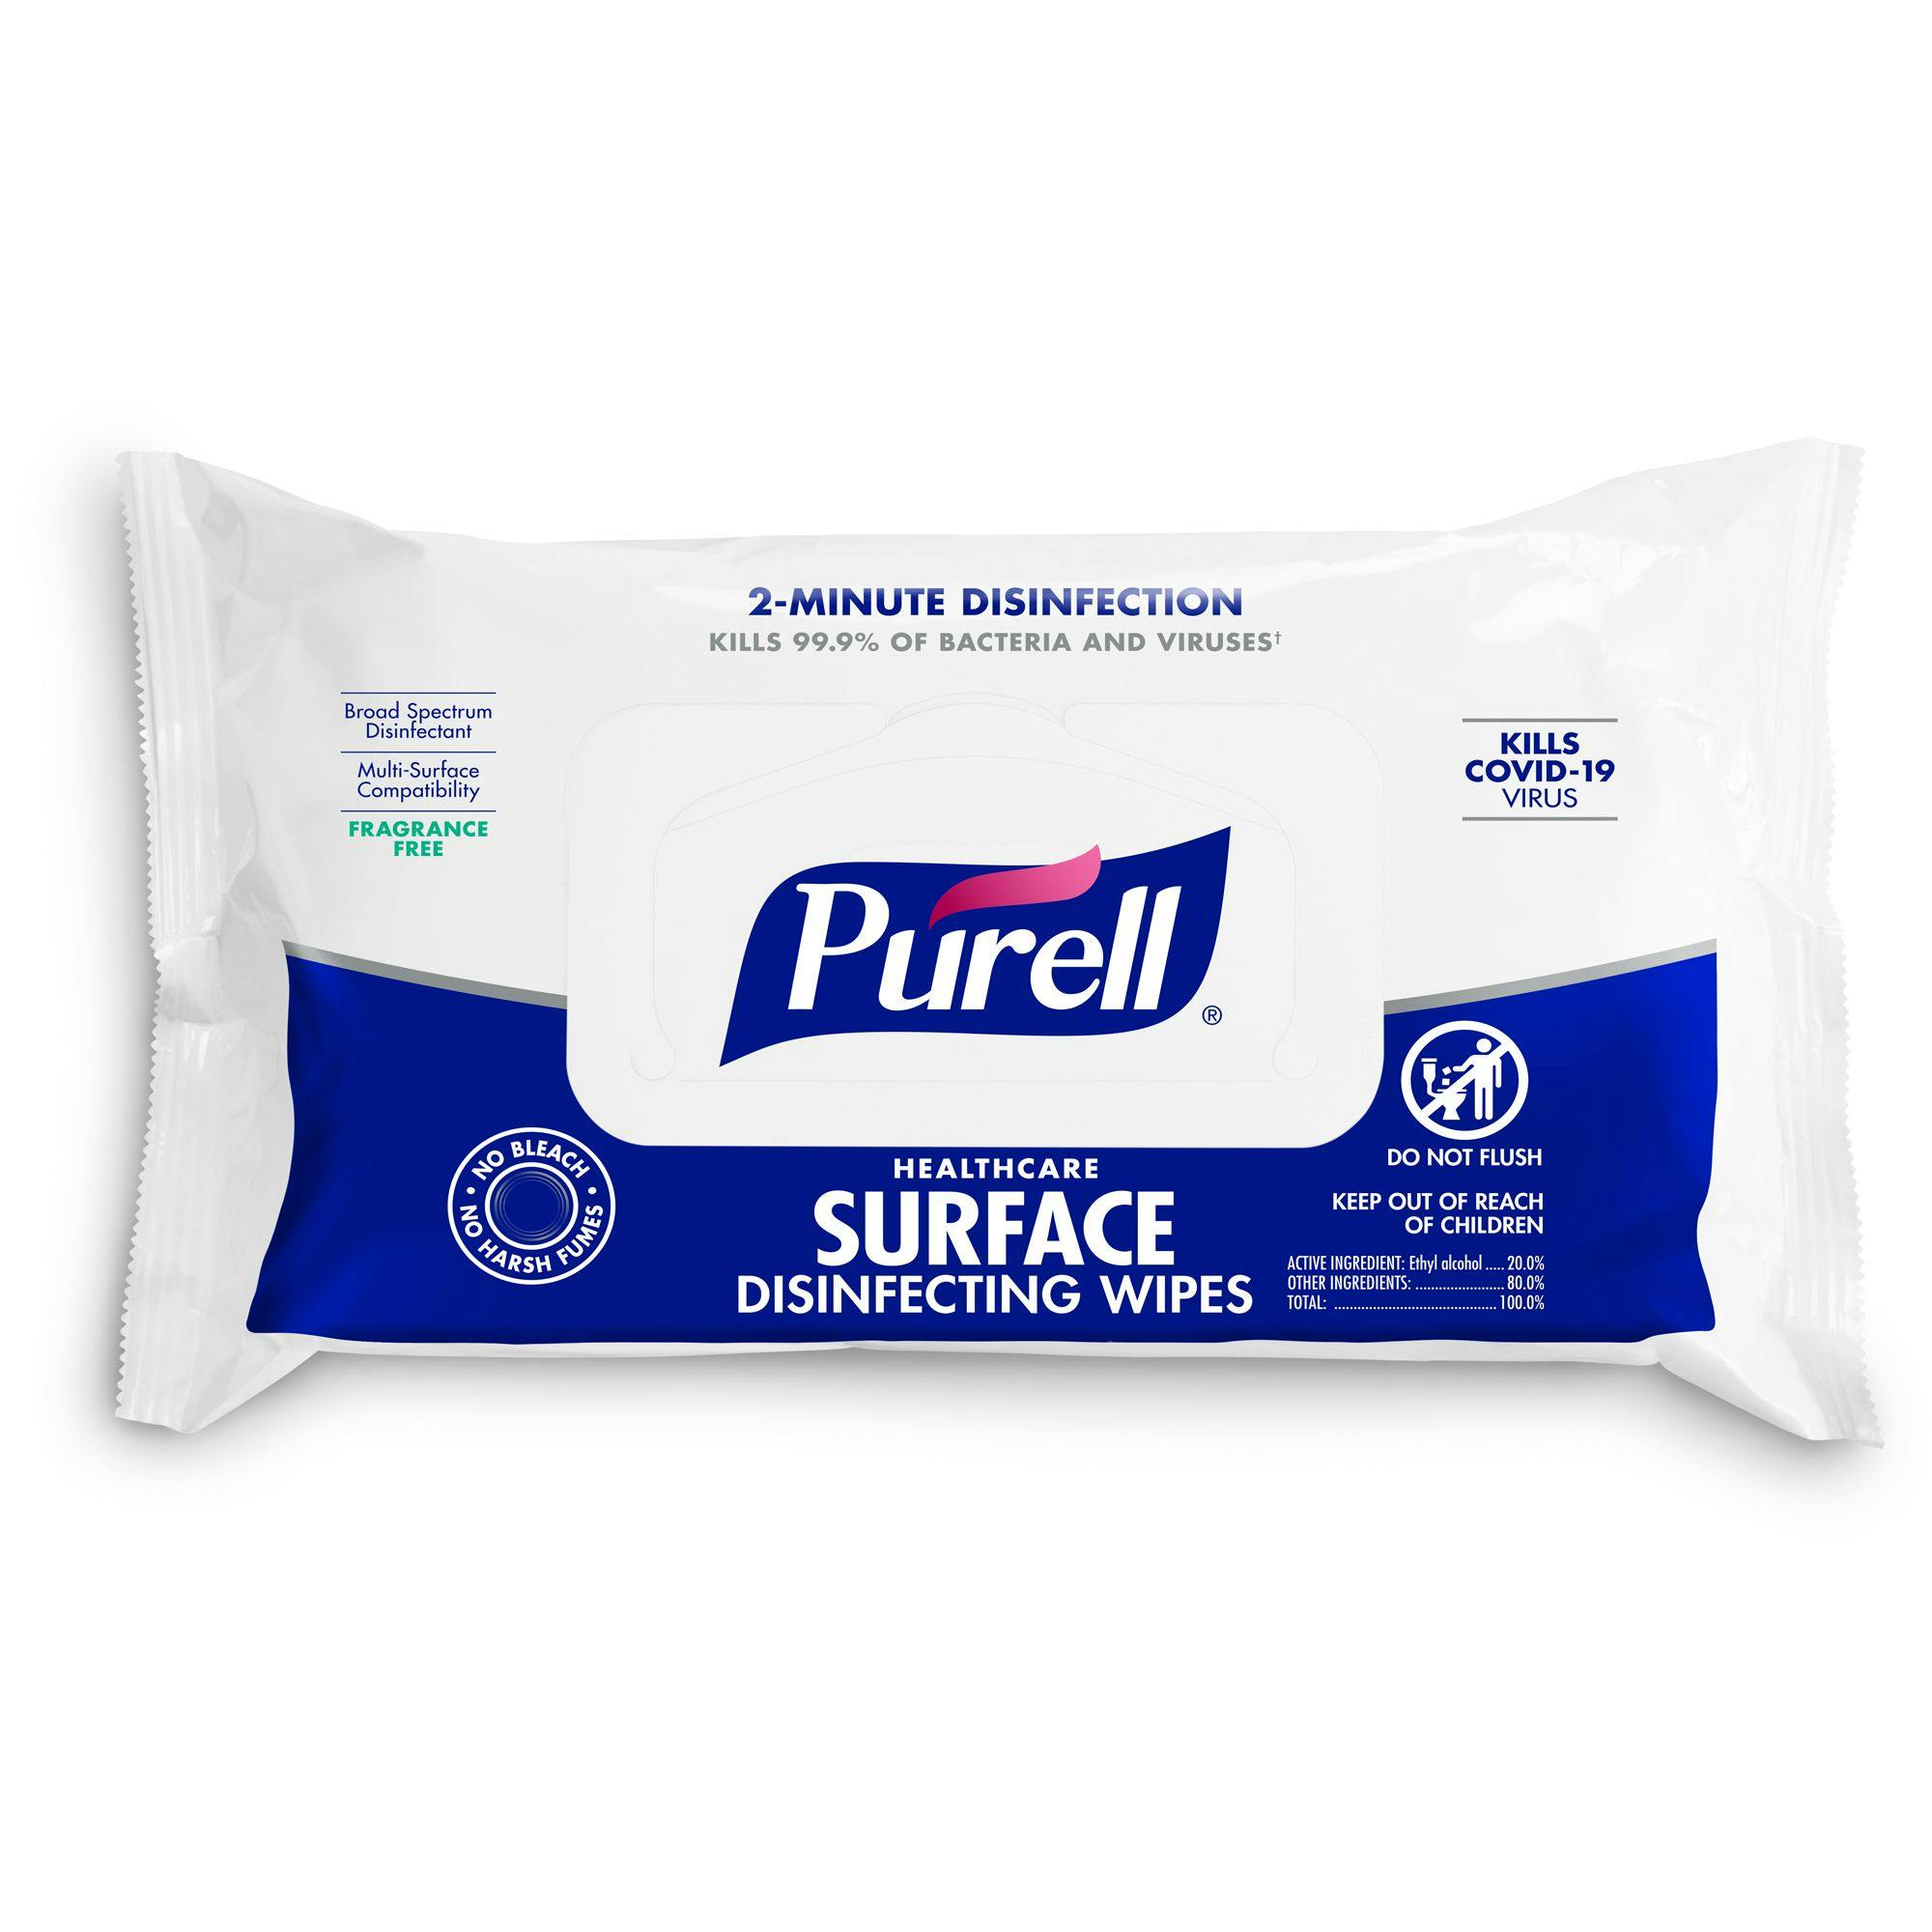 PURELL Health Care Wipes Now Available in New Packaging Option